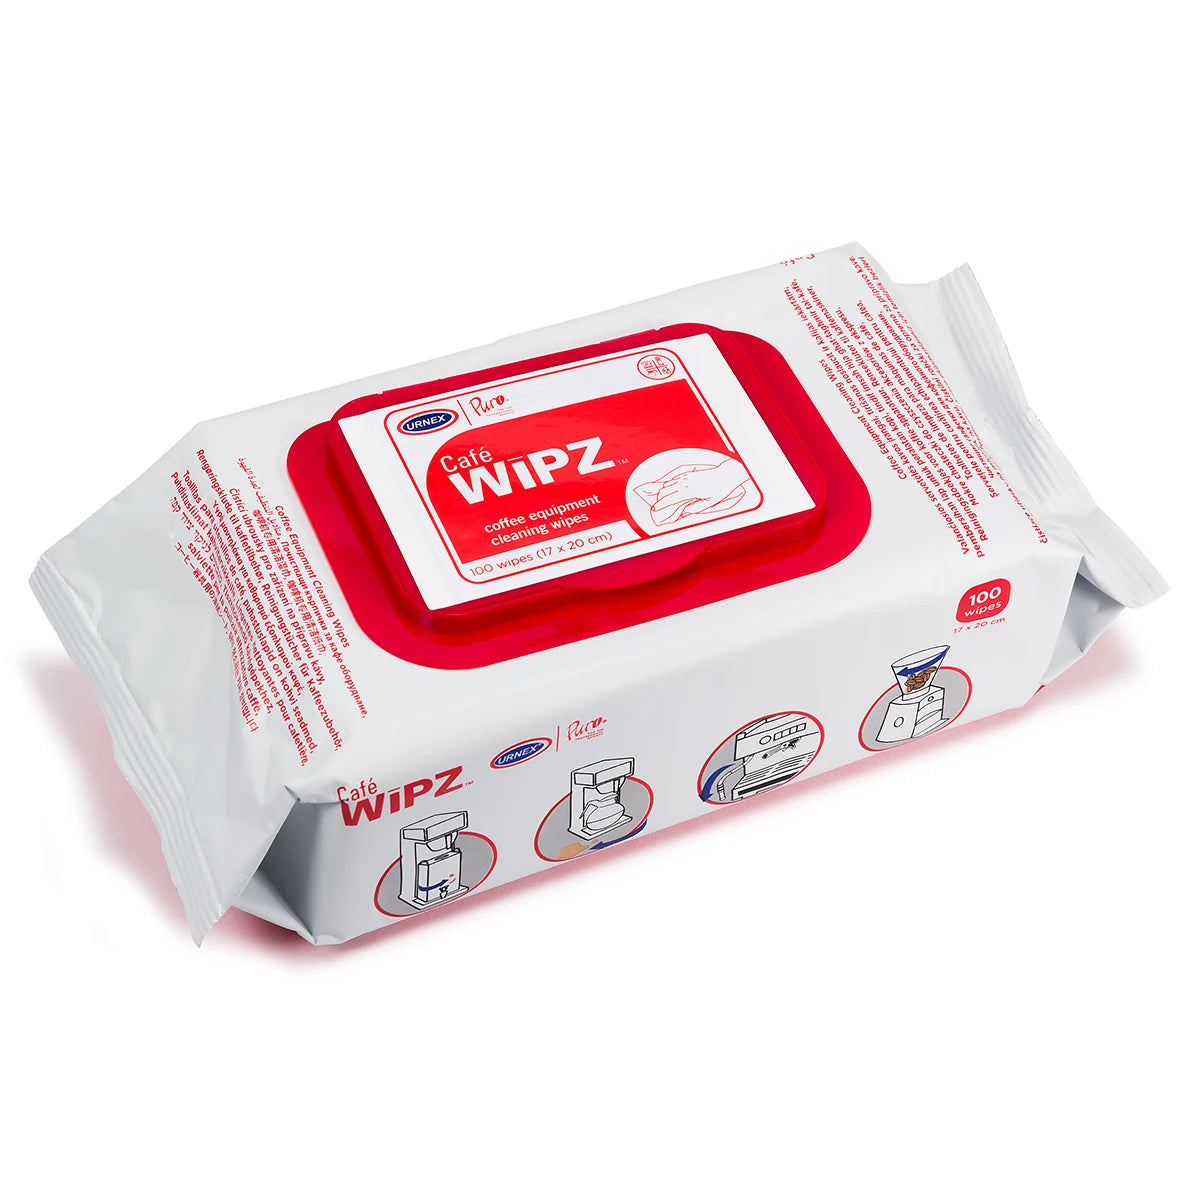 Urnex Cafe Wipz Coffee Equipment Cleaning Wipes